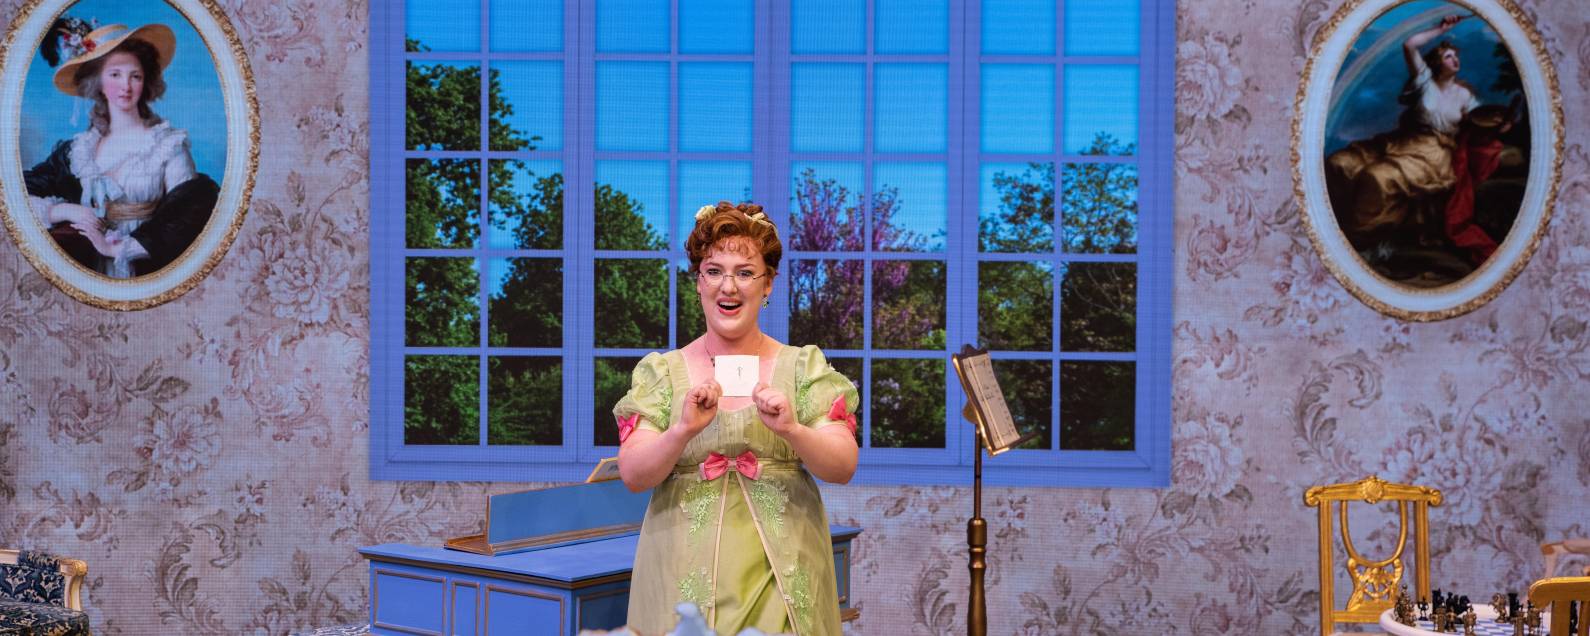 Meridian Prall (Rosina) holds up a cup of tea in front of a beautiful window during The Barber of Seville.